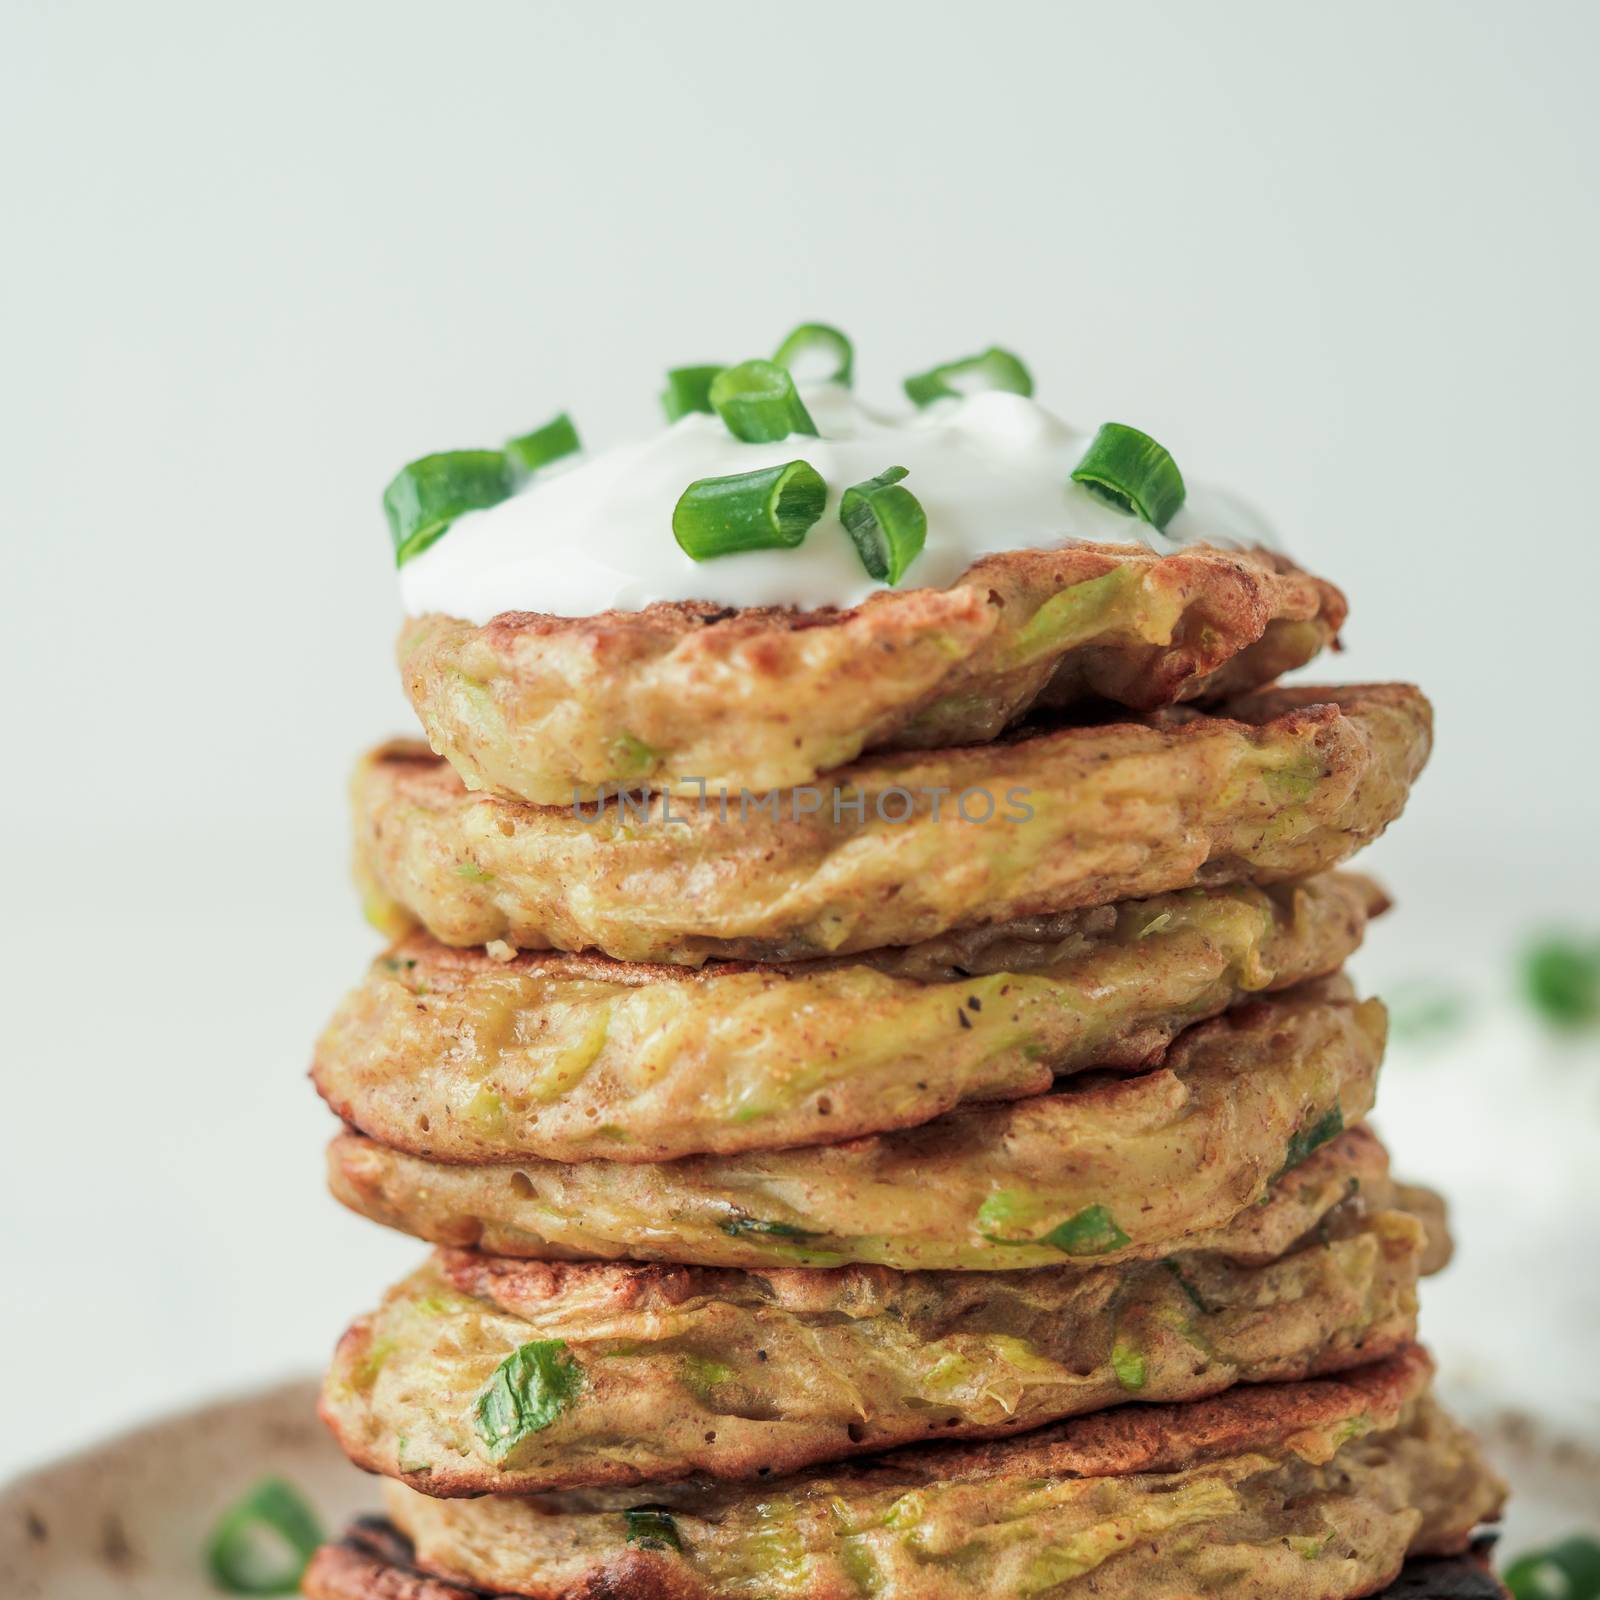 Zucchini fritters. Gluten free zucchini fritters in stack on white background. Vegetable zucchini pancakes or fritters with green onion and parmesan cheese, served sour cream or greek yogurt